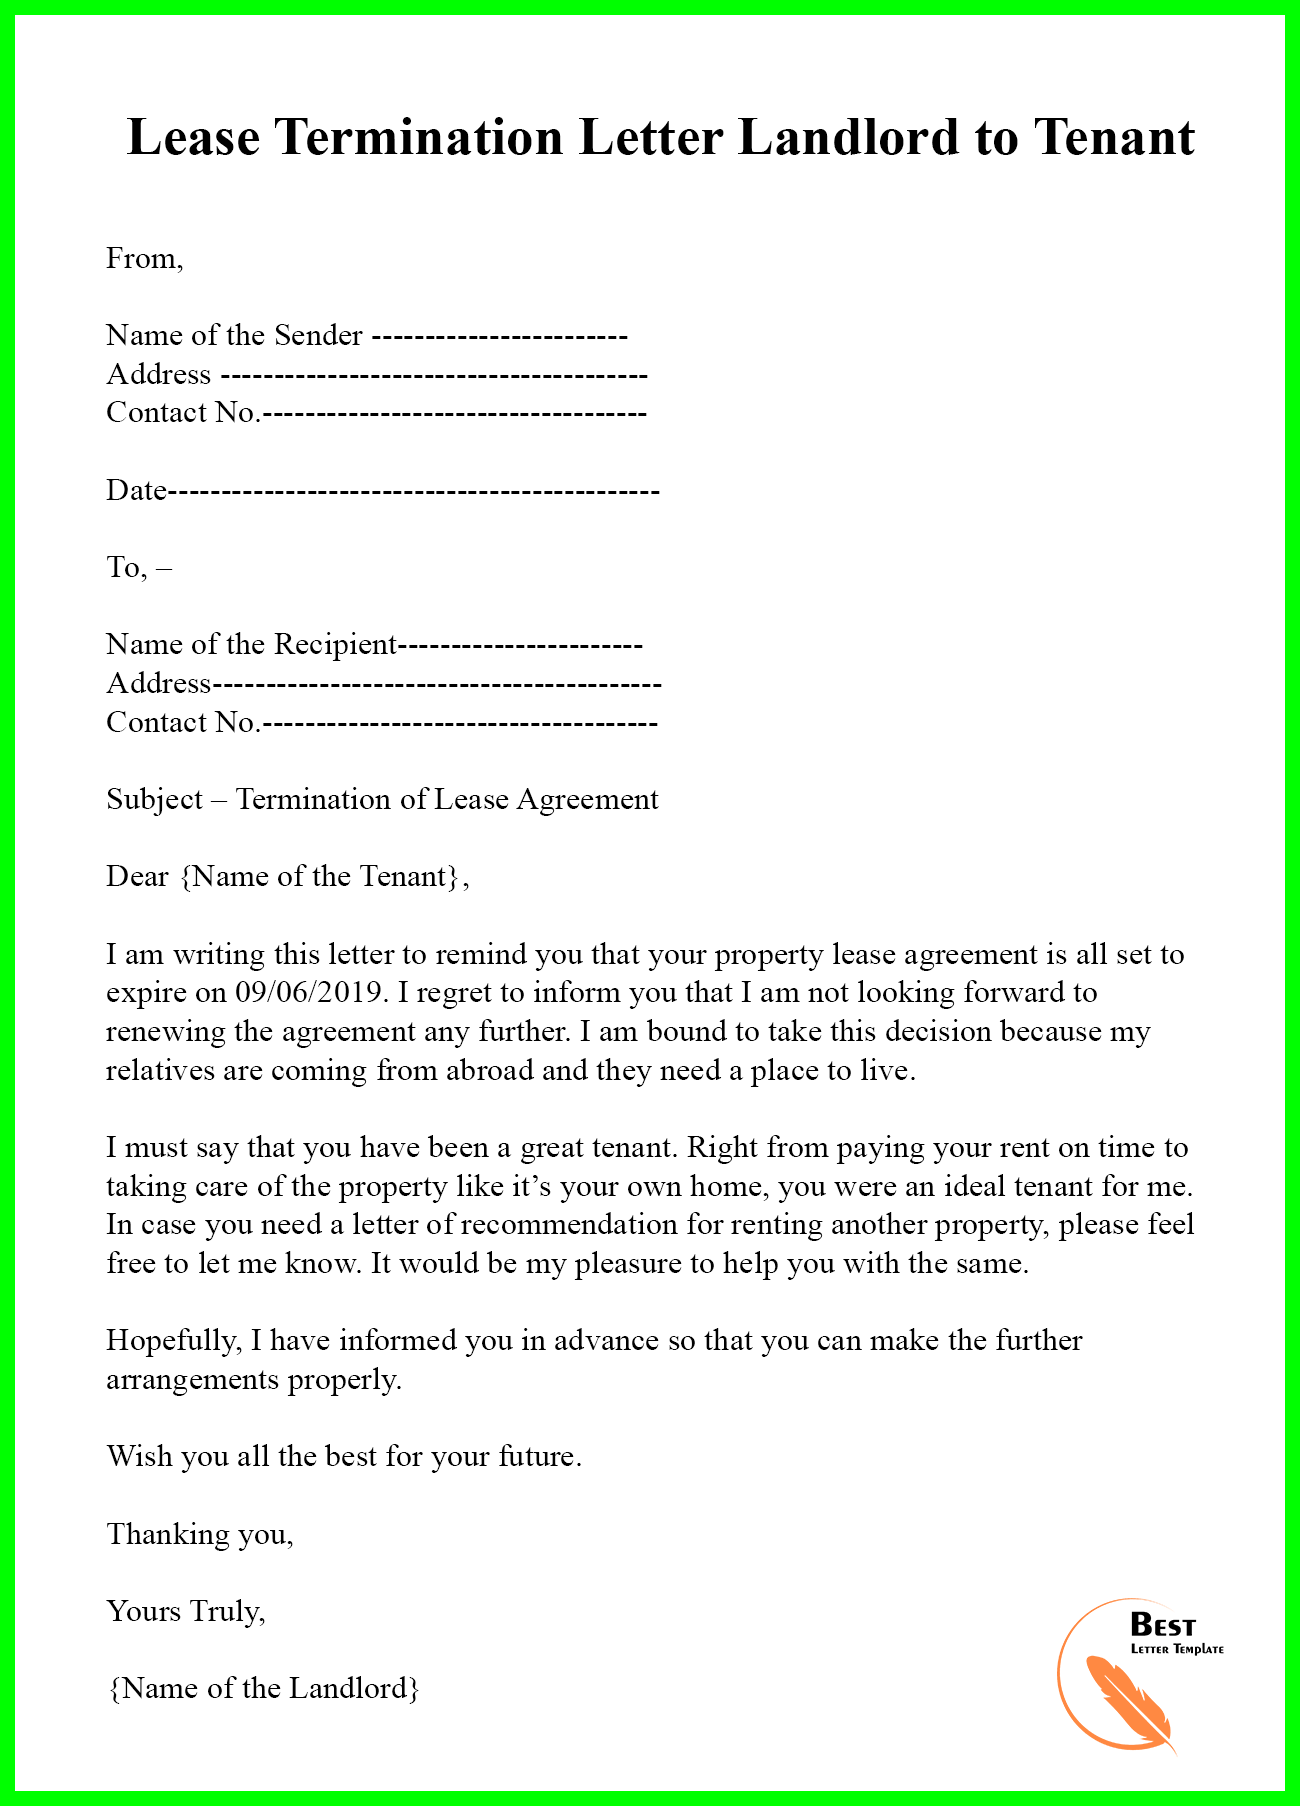 Lease Termination Letter To Tenant from bestlettertemplate.com